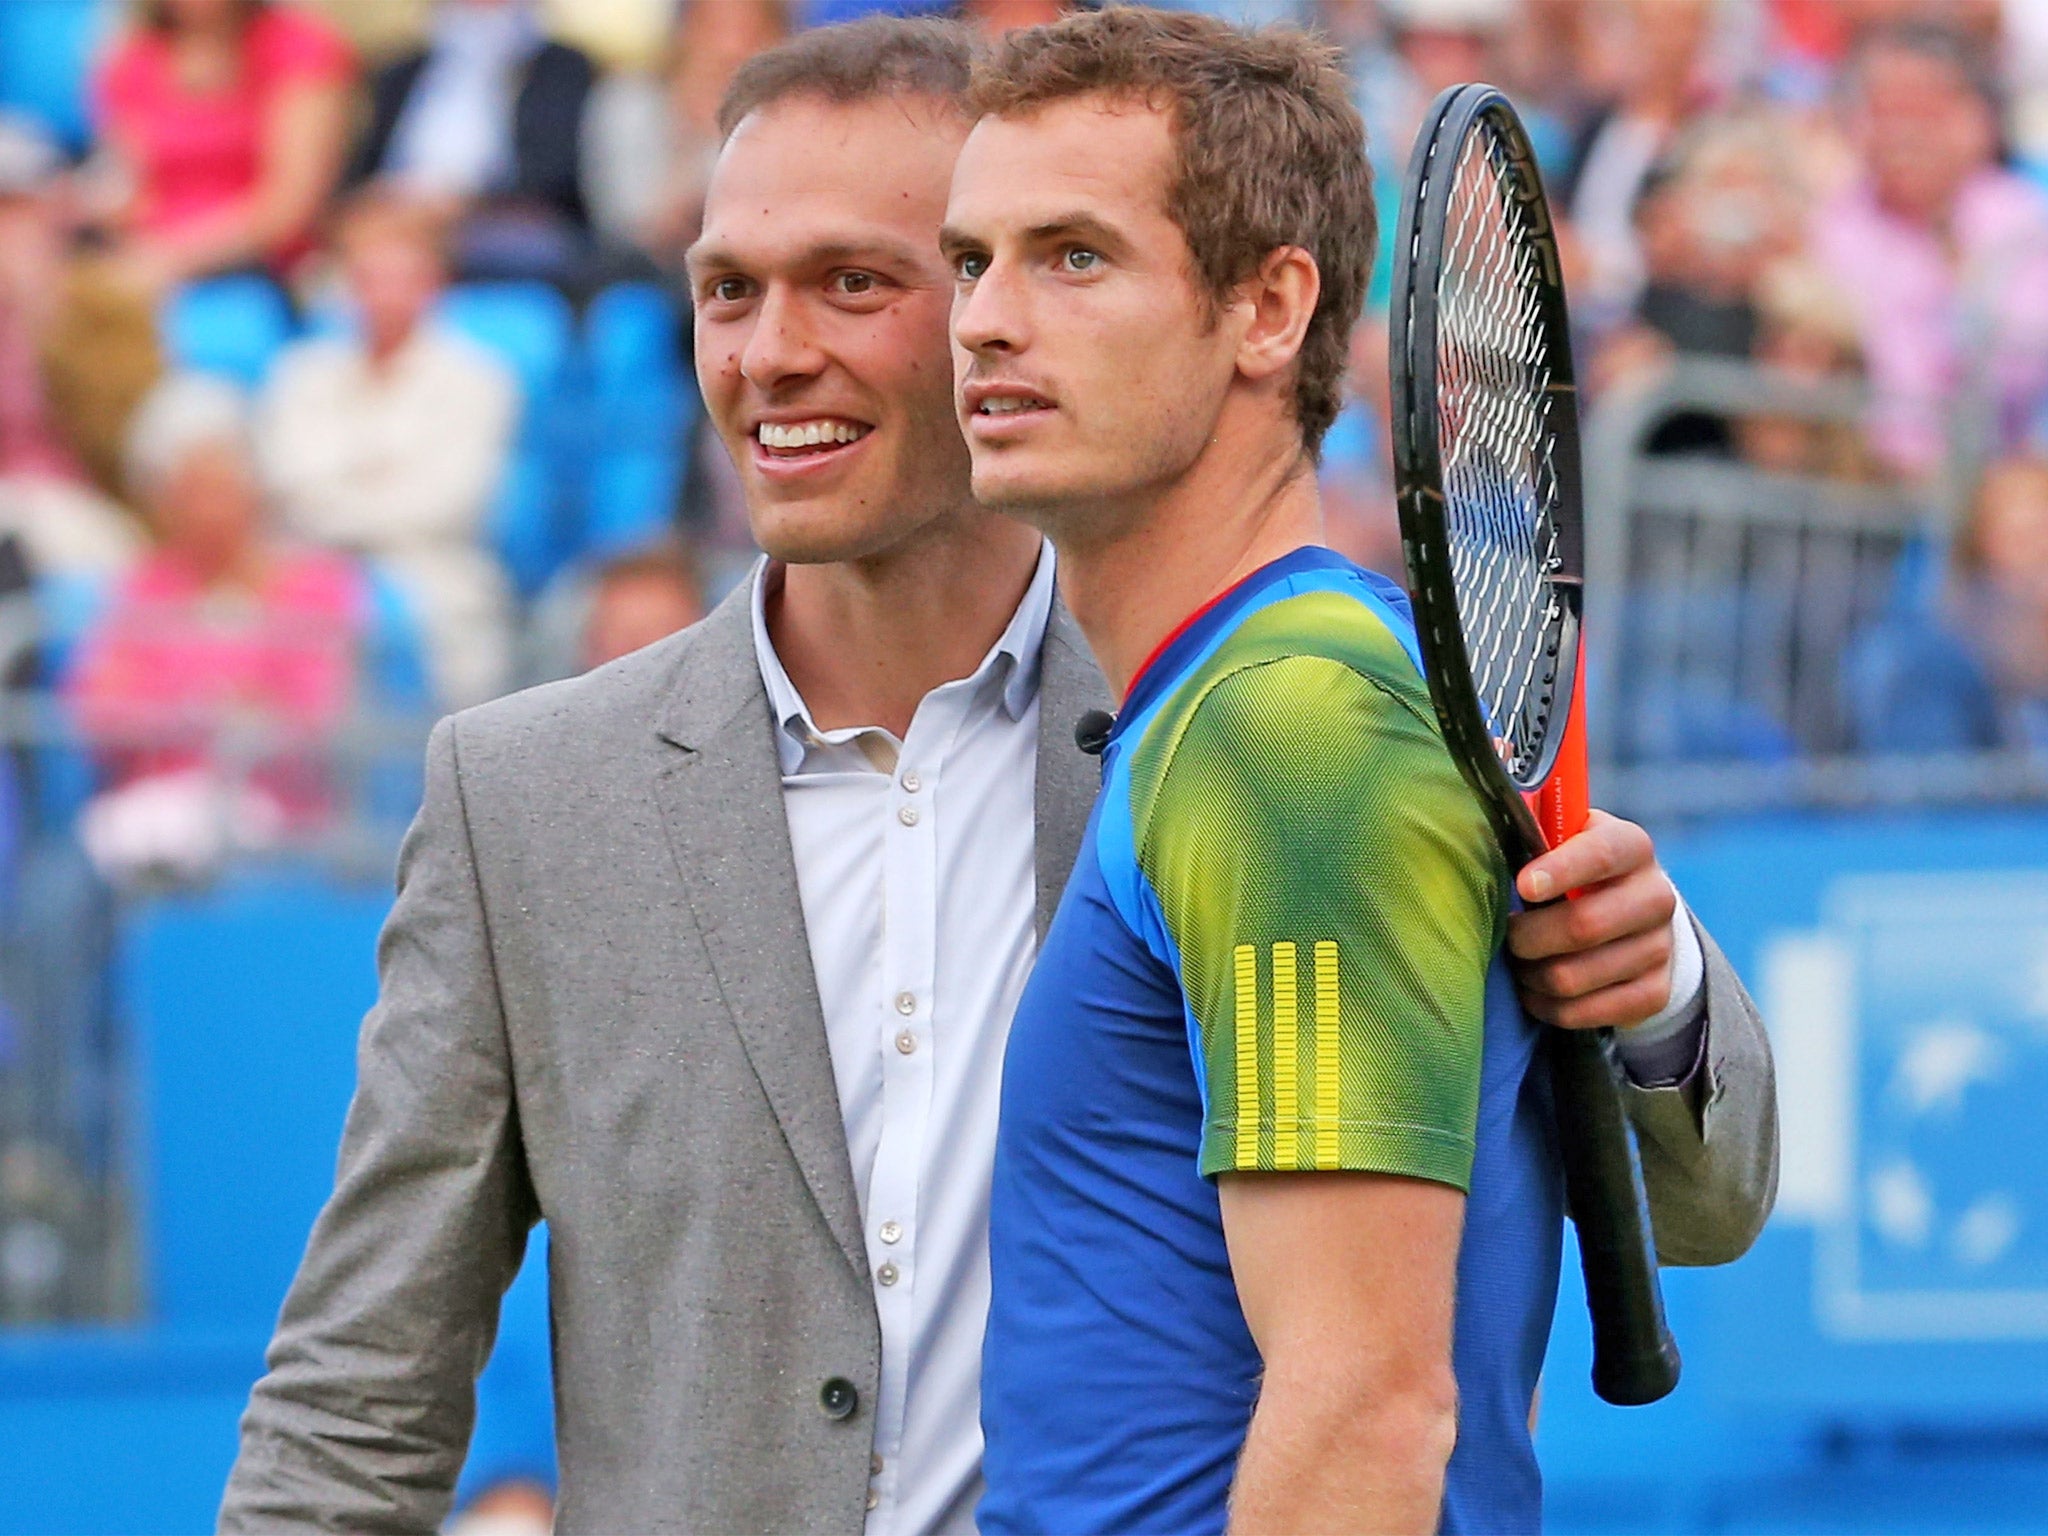 Ross Hutchins (left) hugs Andy Murray after a tennis match in aid of a cancer charity